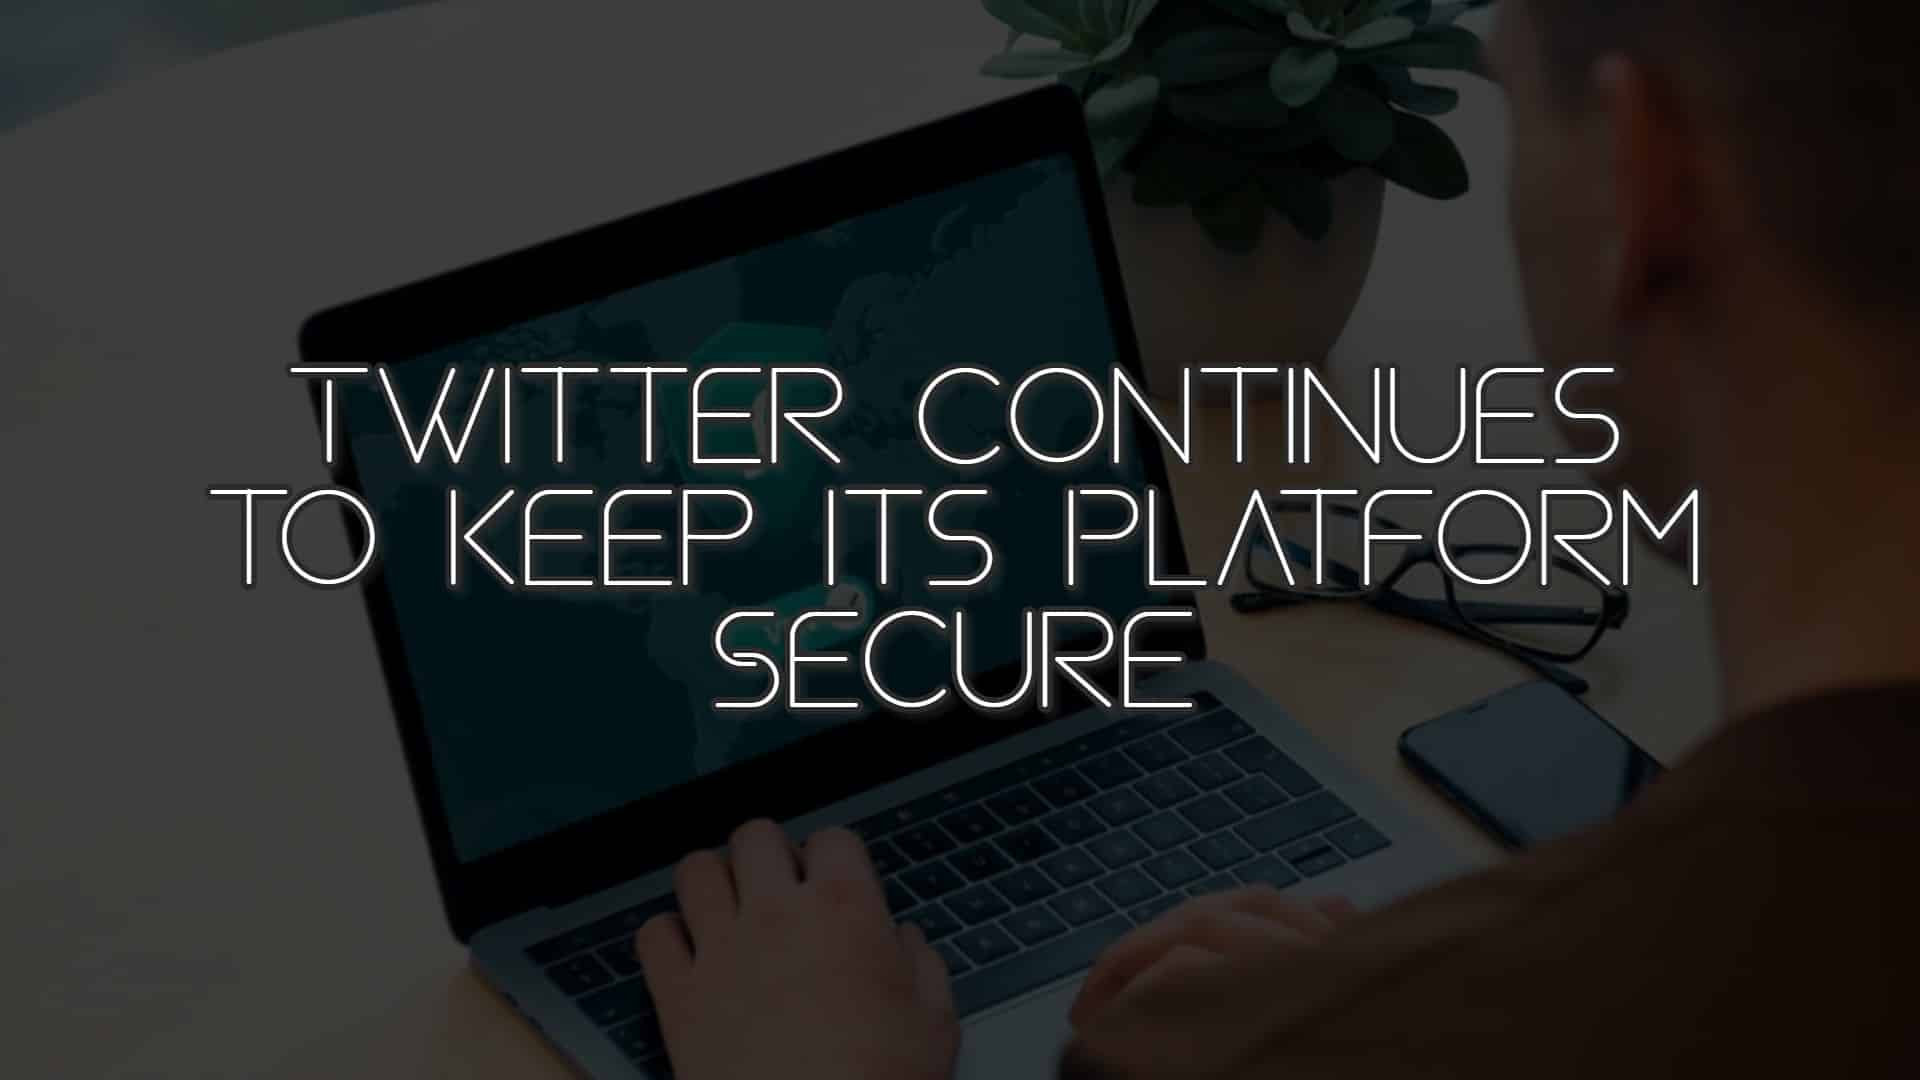 Twitter Continues to Keep Its Platform Secure